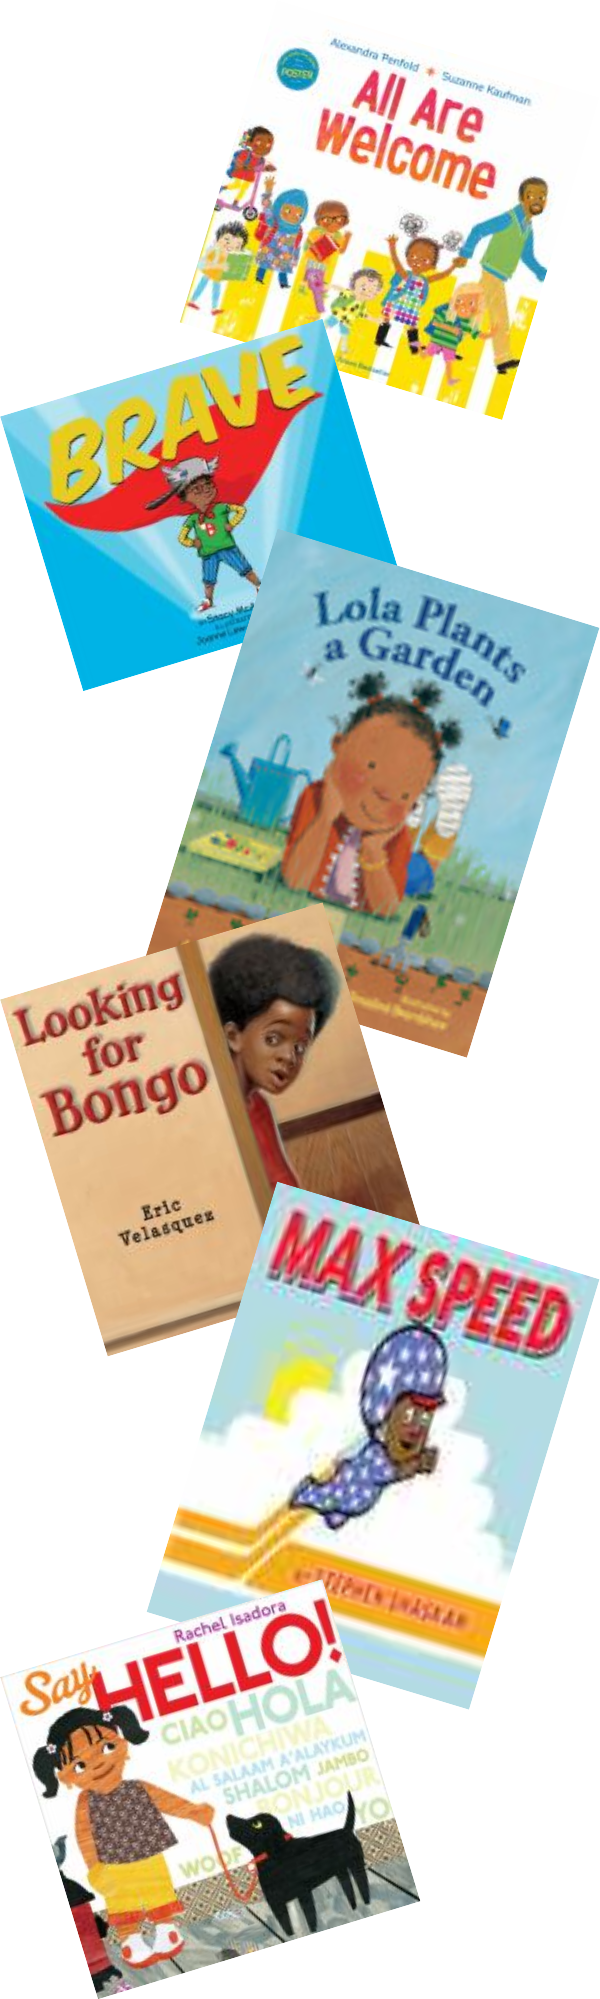 book covers of recommended titles for diverse children's books